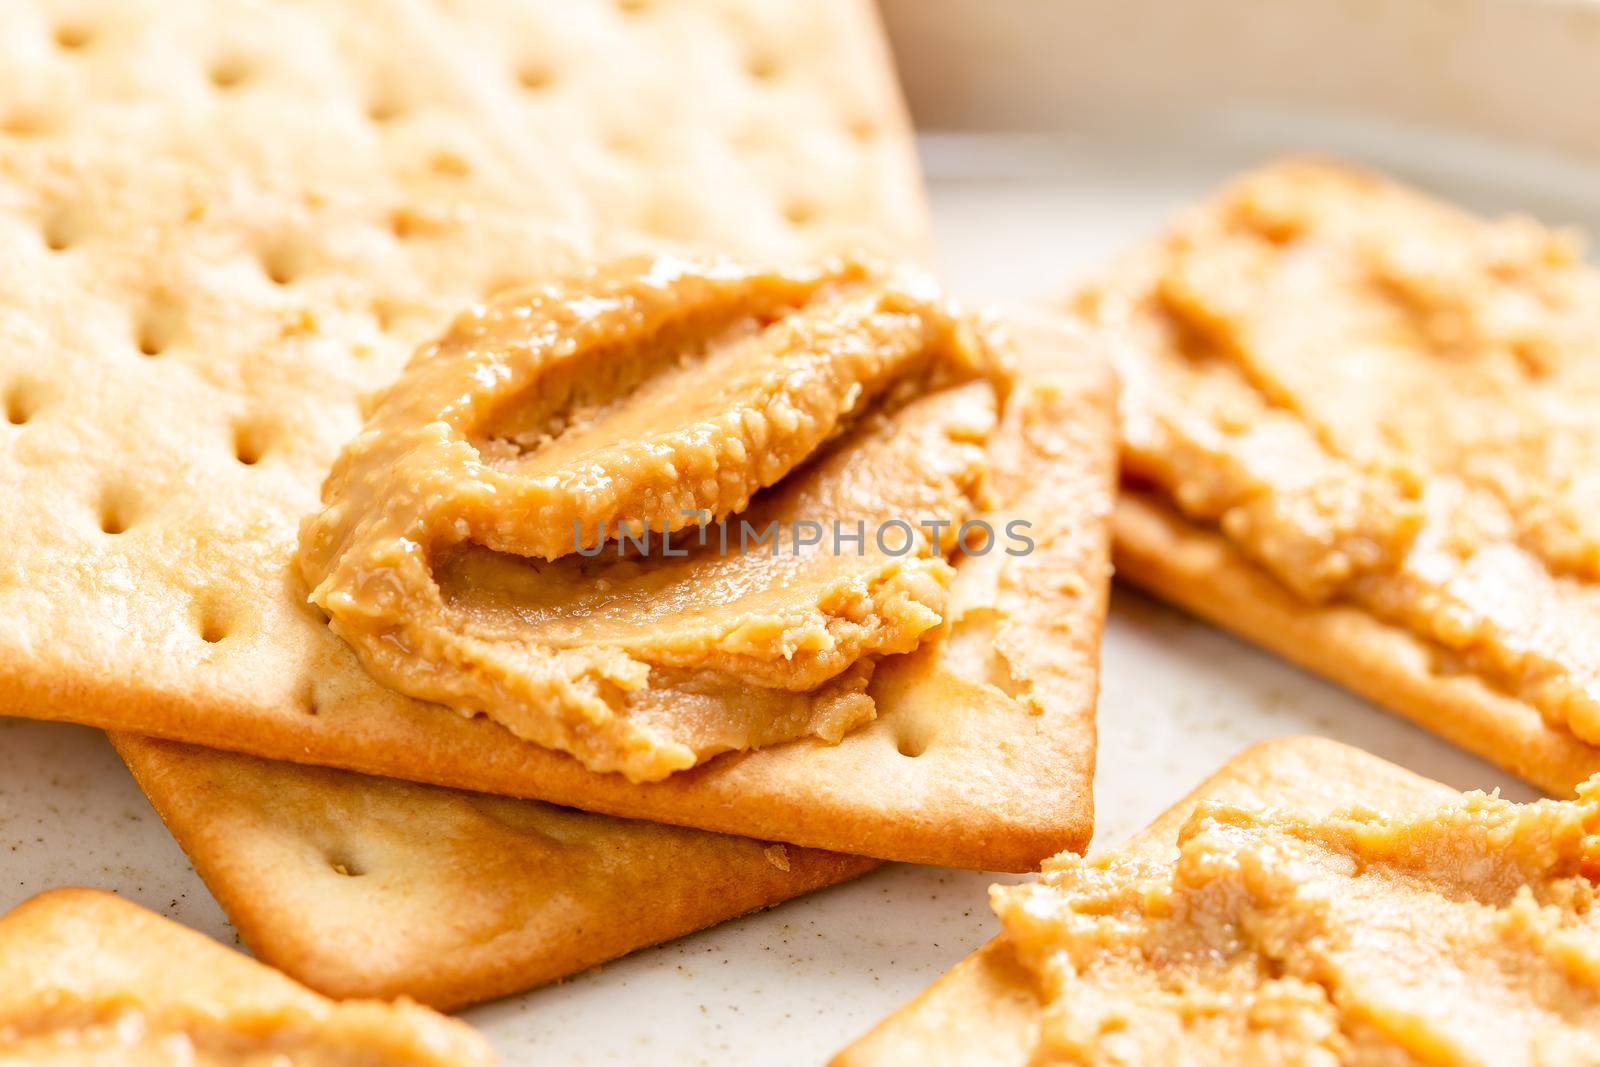 Crunchy peanut butter spread on soda crackers close up